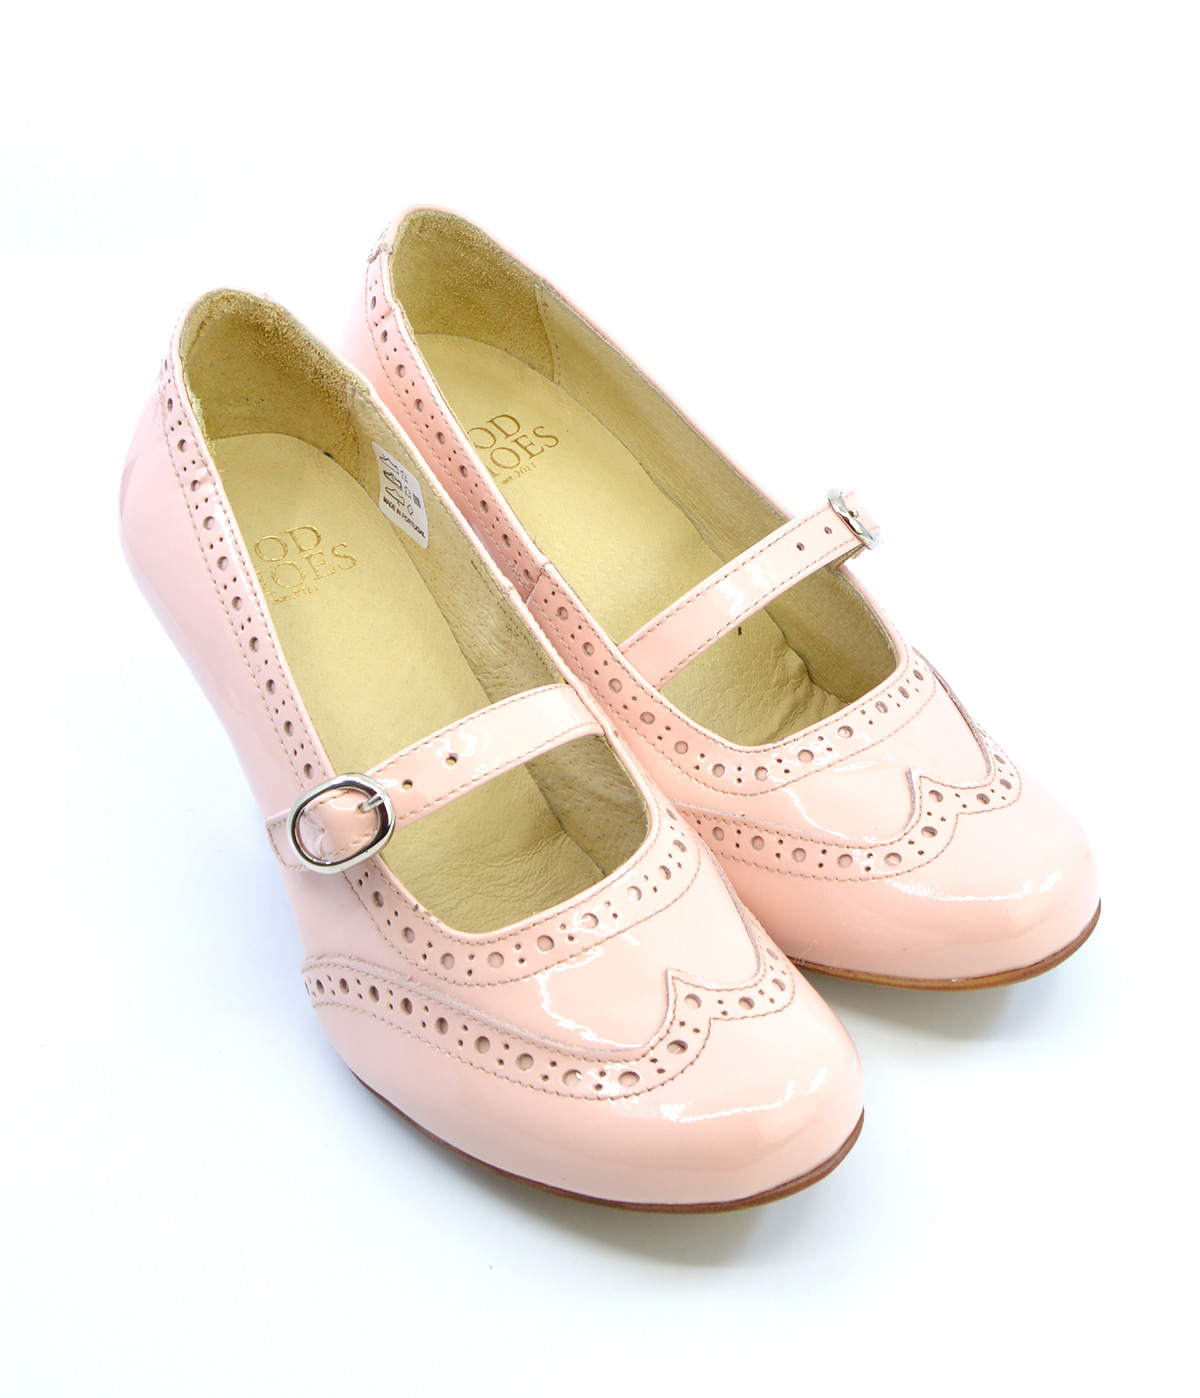 The Penny Pink Patent Leather Mary Jane Vintage Retro